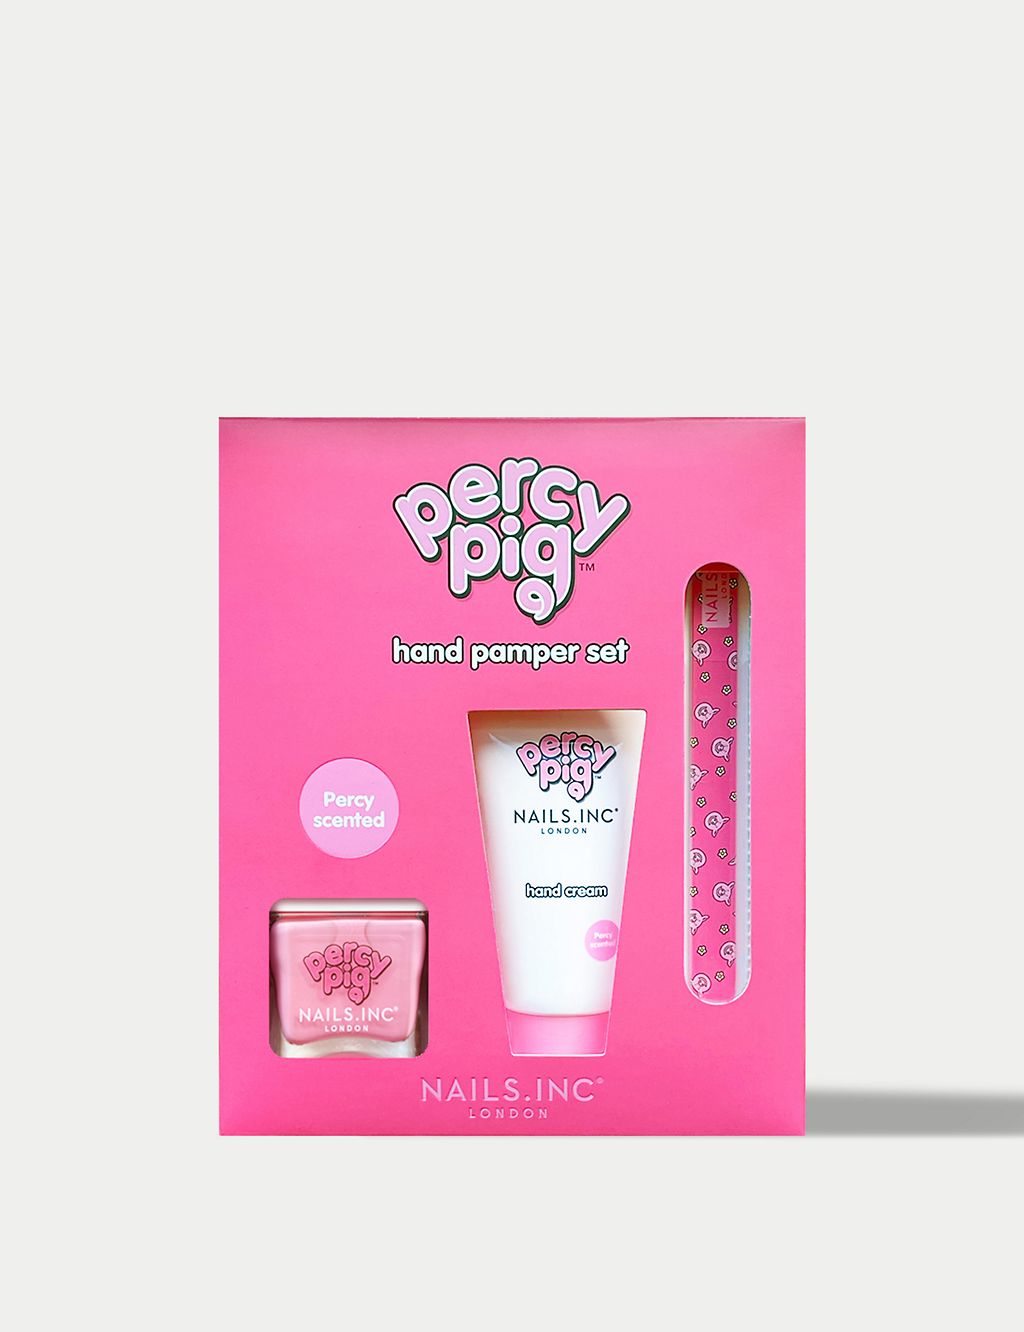 Nails.INC Percy Pig Hand Pamper Set 3 of 5